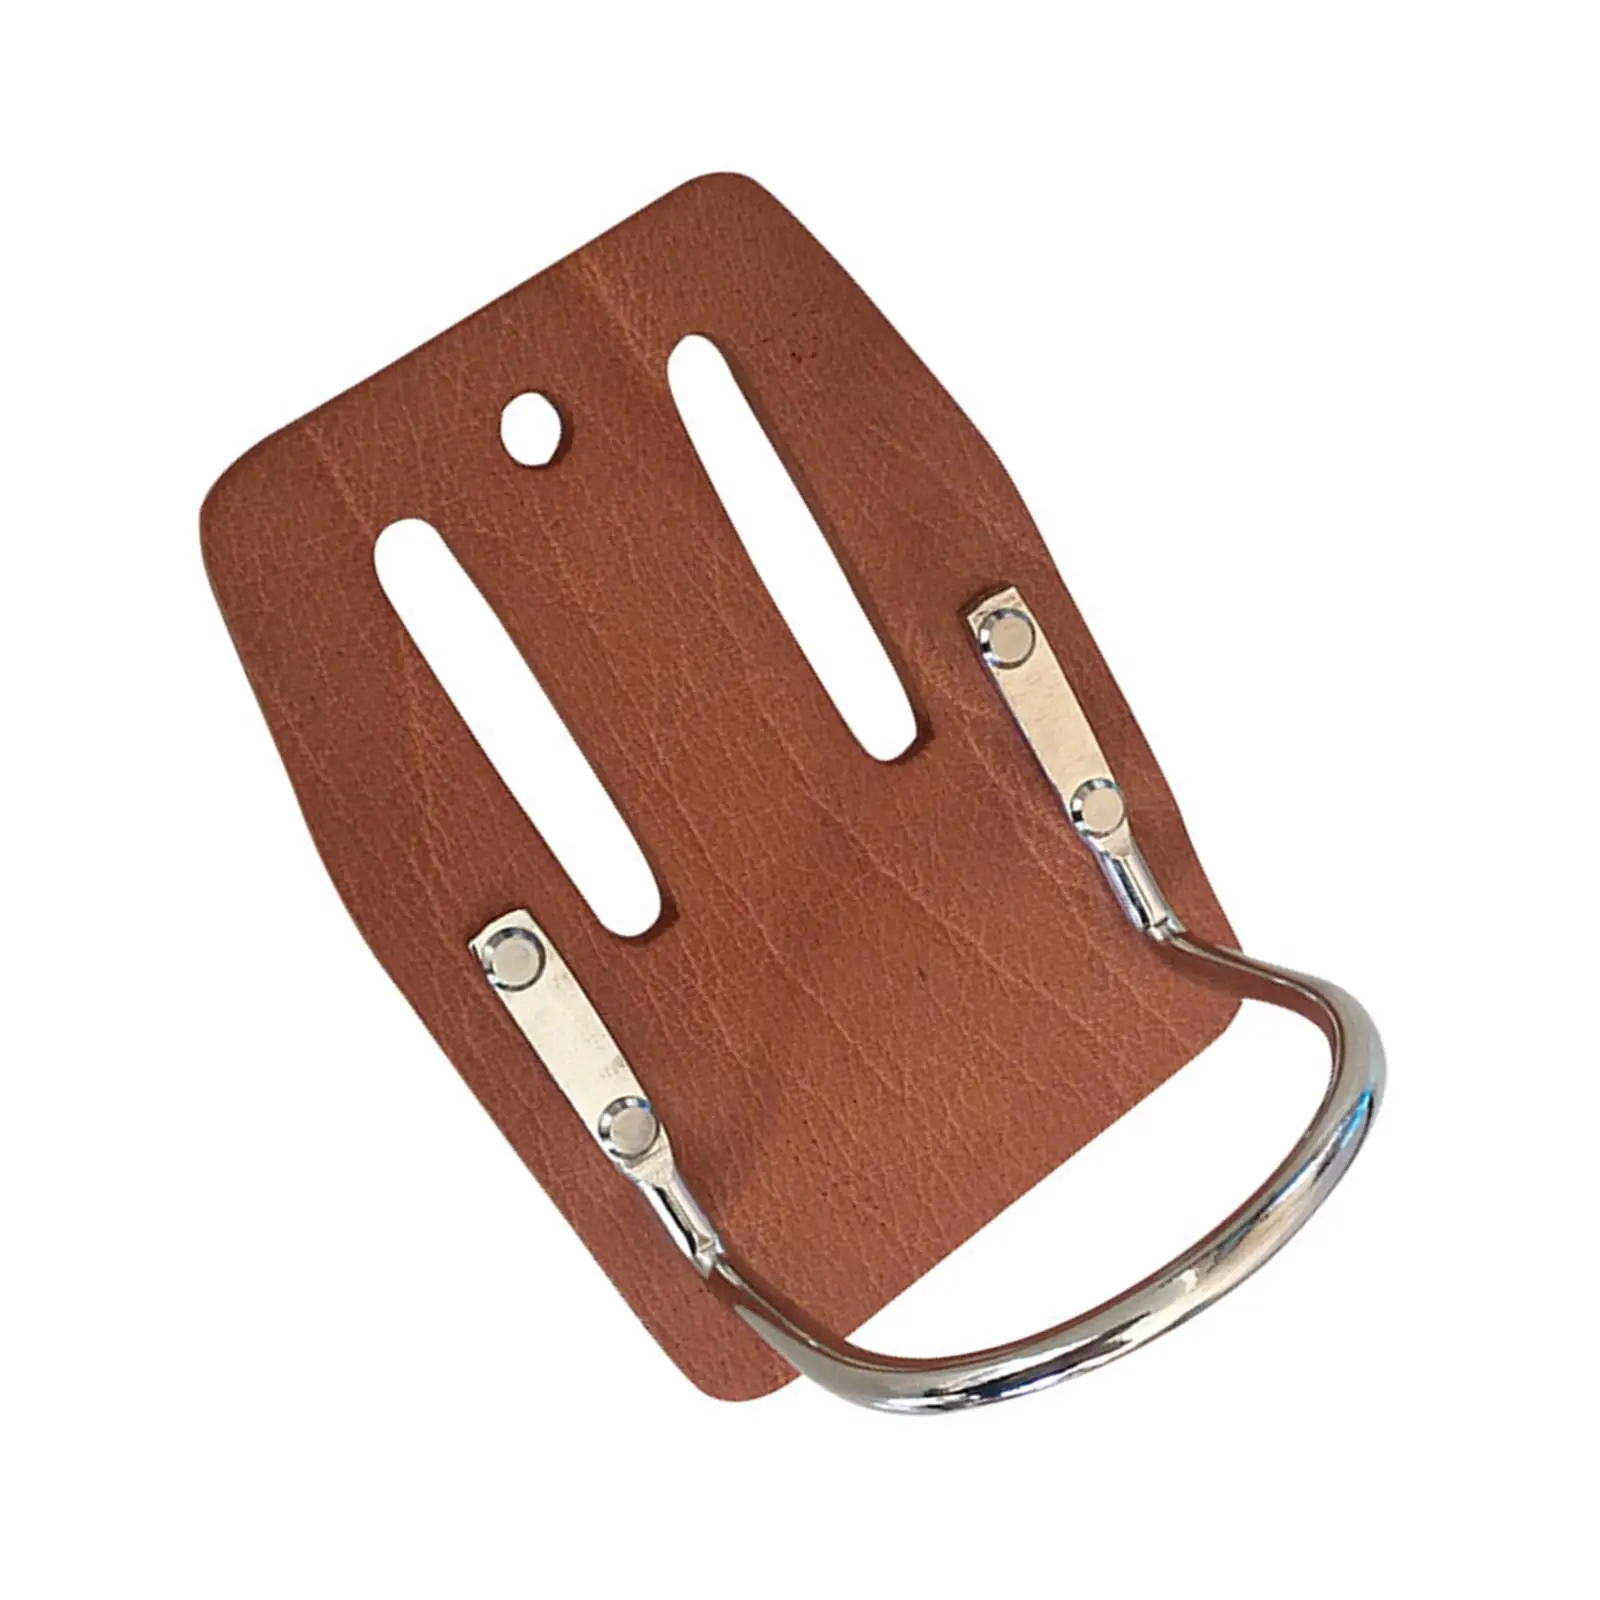 Multifunction PU Leather Hammer Holder PU Leather Pouch Bag for Handcraft